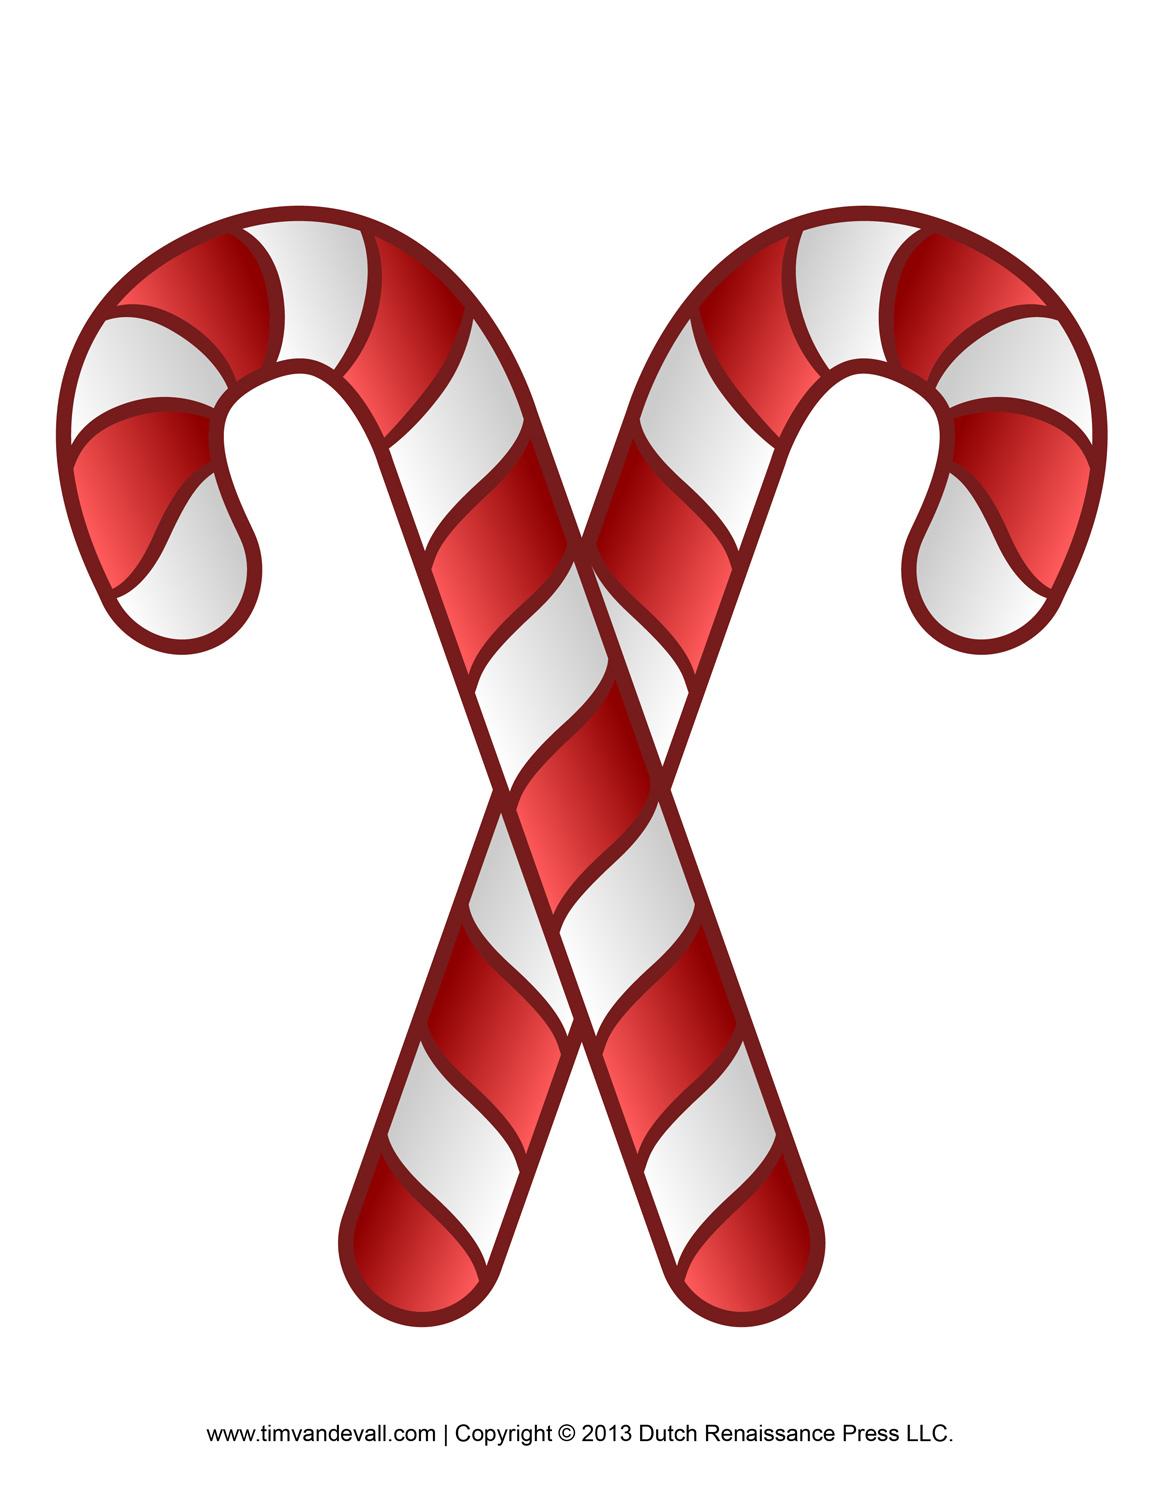 Free Candy Cane Public Domain Christmas Images Clipart